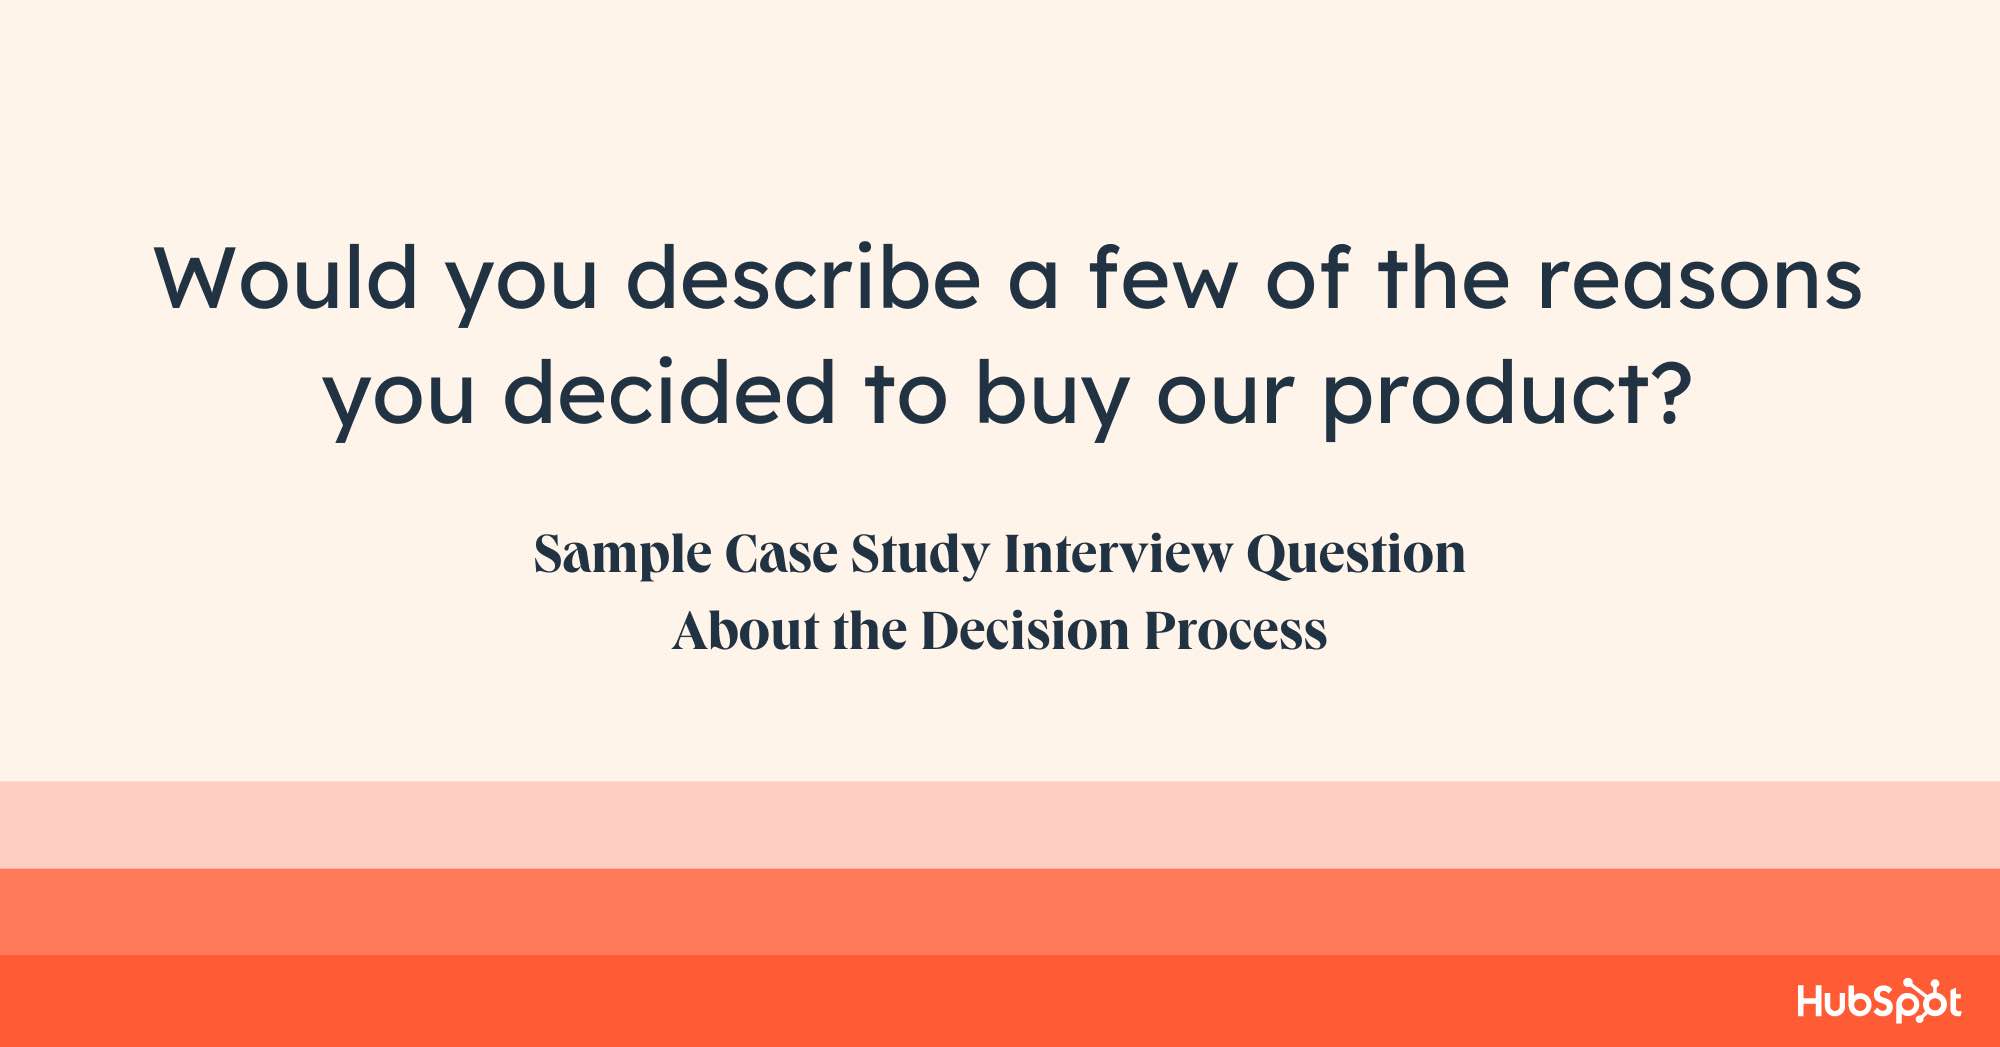 case study questions examples, would you describe a few of the reasons you decided to buy our product?